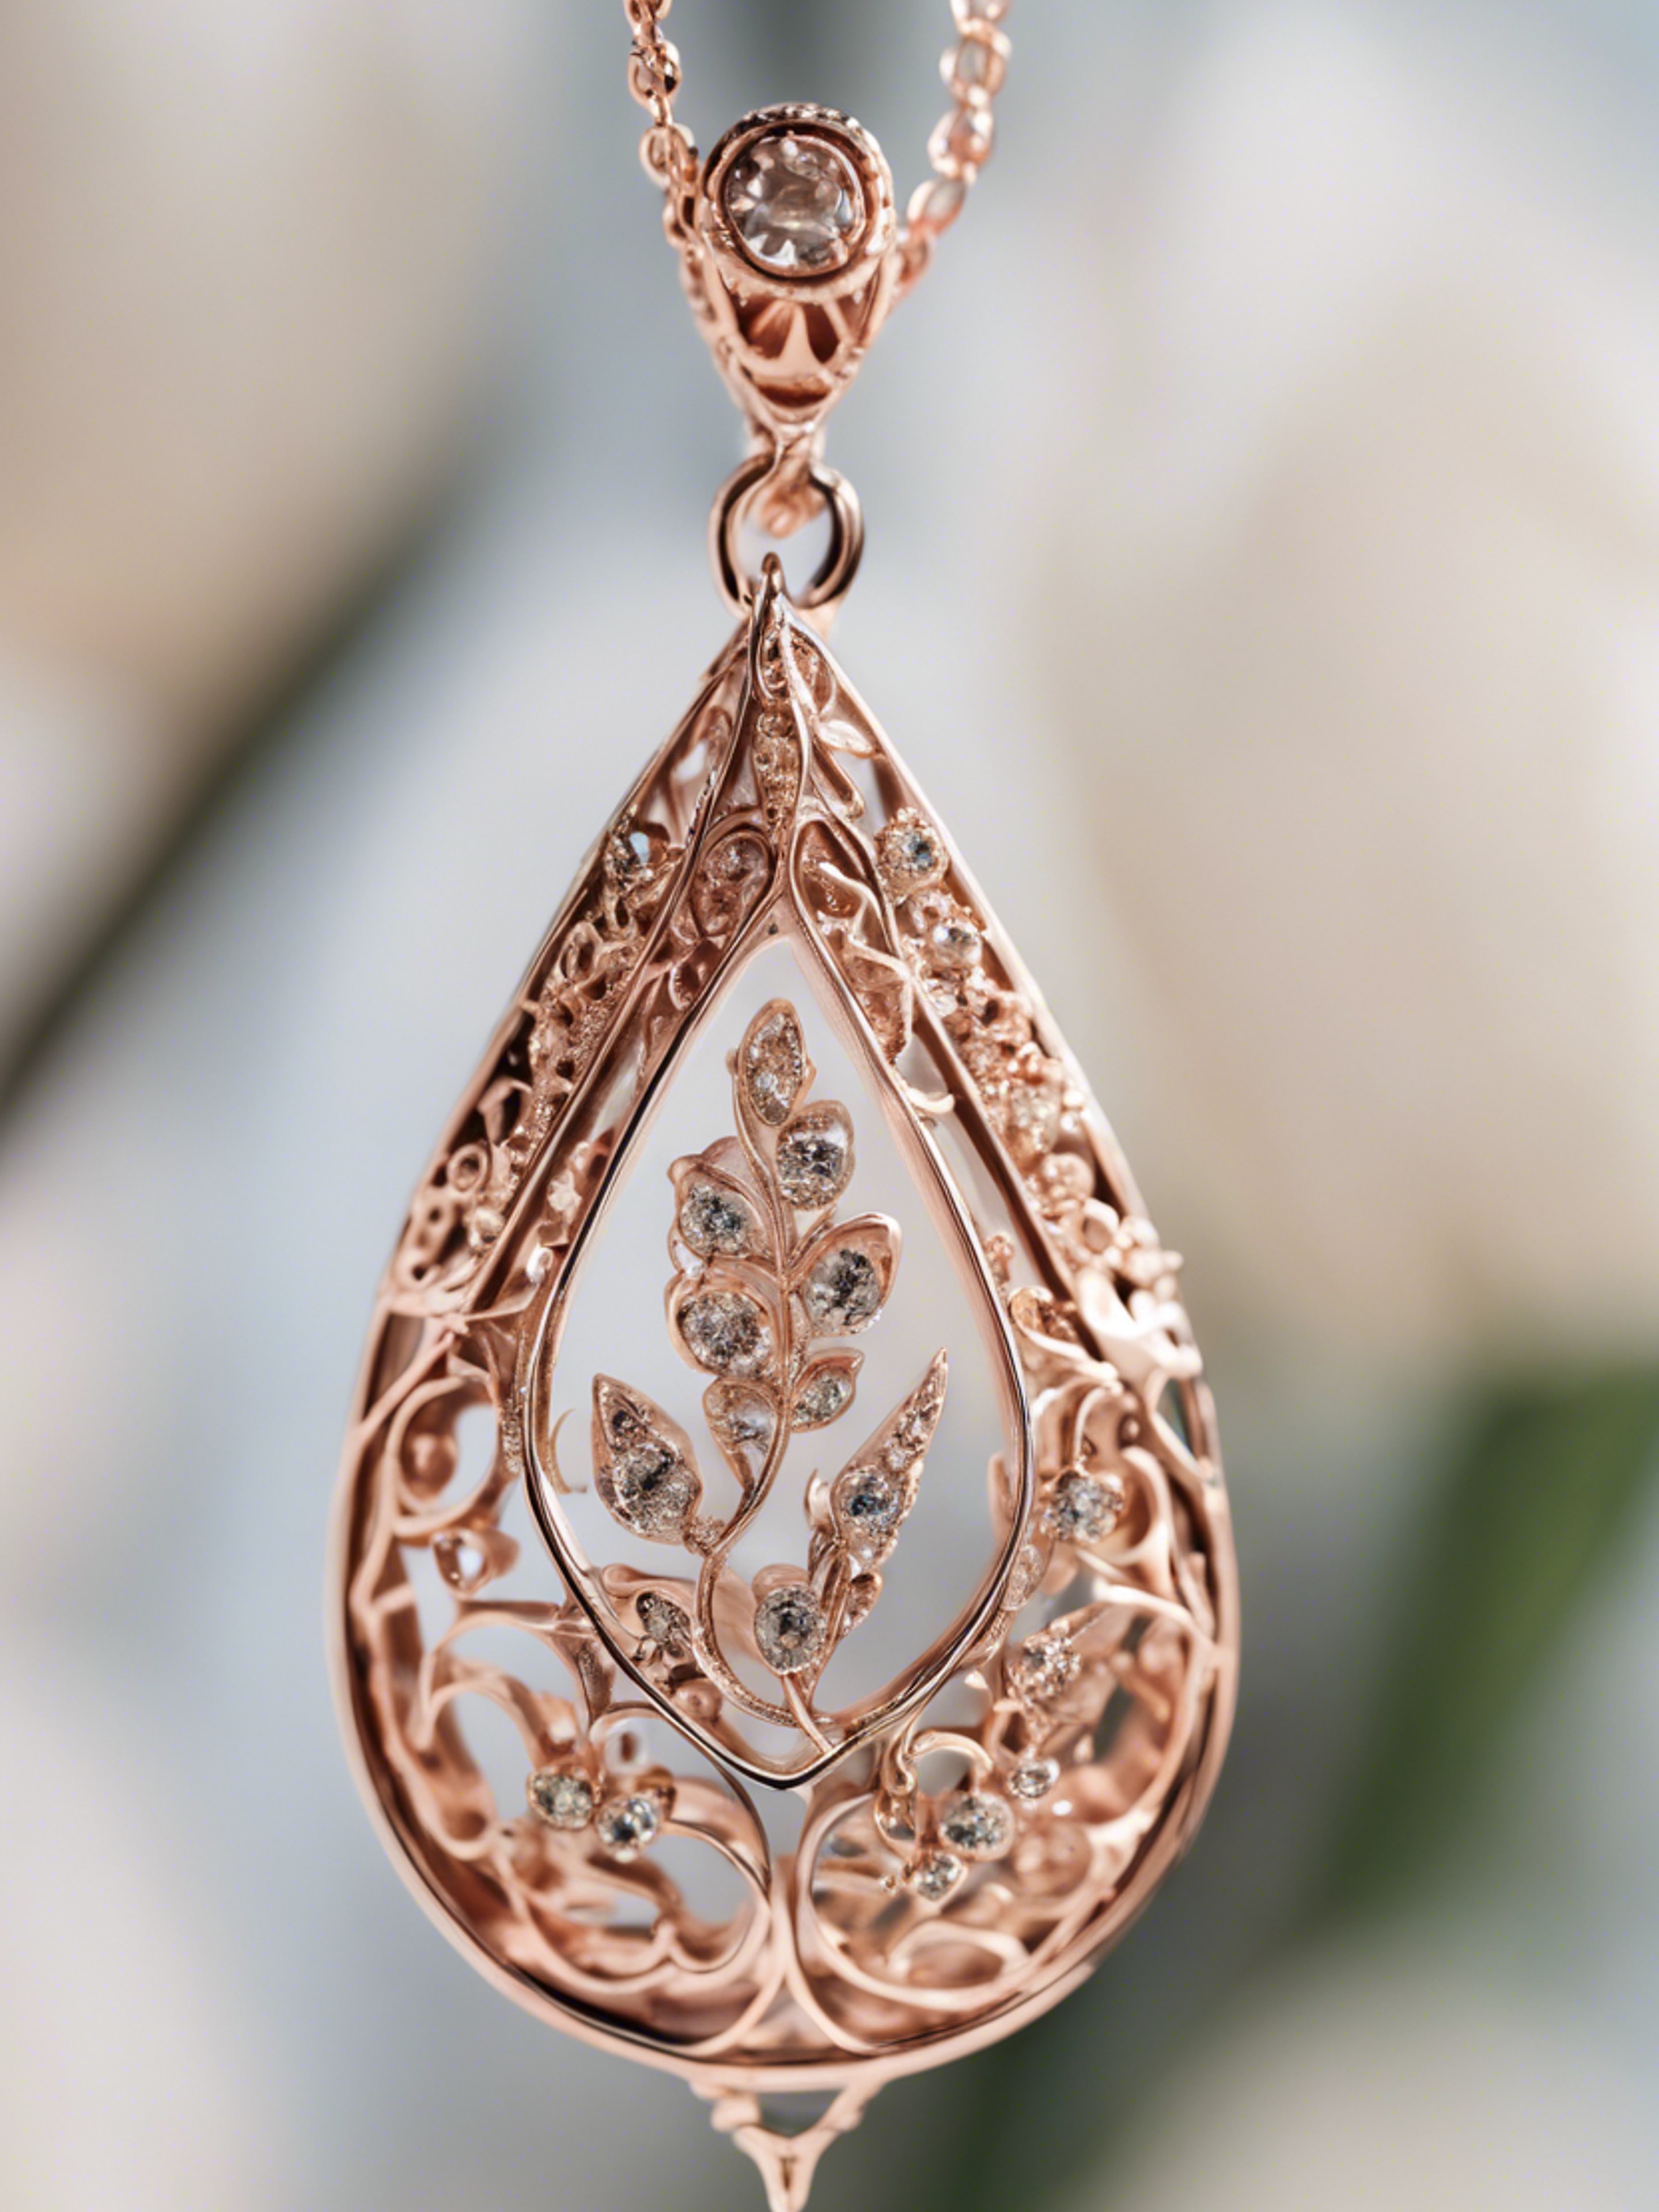 A close-up of a rose gold teardrop-shaped pendant with an intricate, floral design. Шпалери[94a65aa8484349f1bf09]